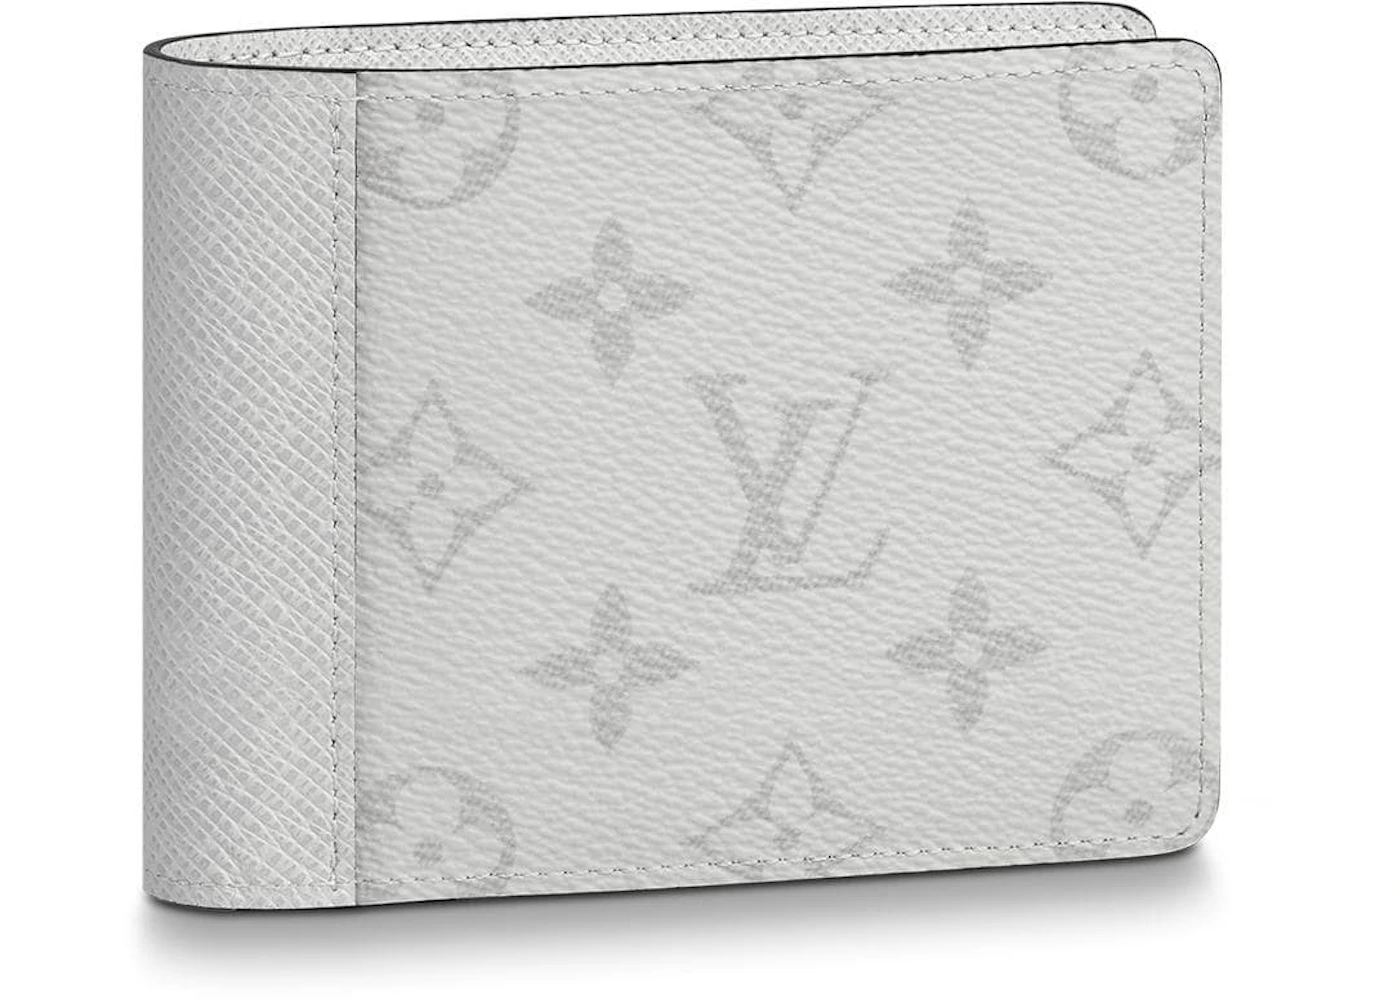 lv wallet on